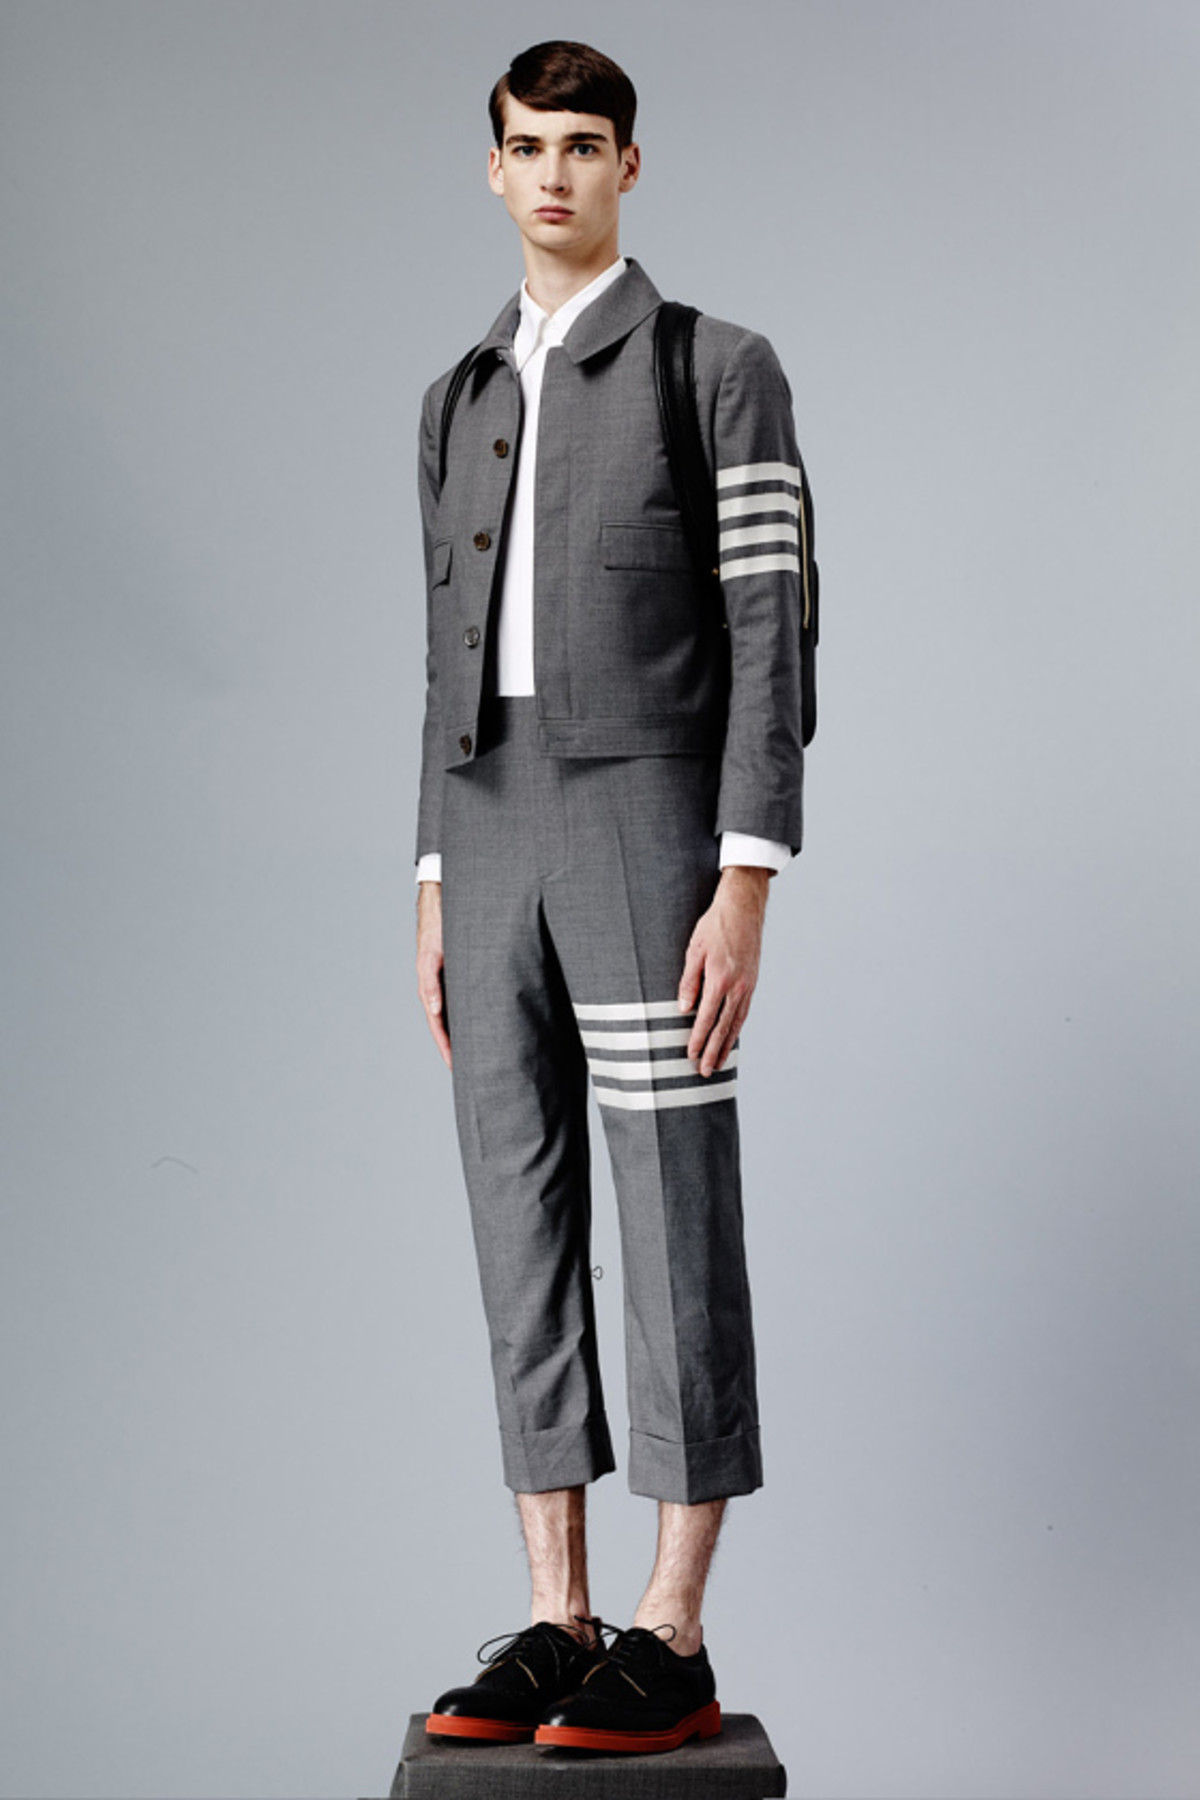 Thom Browne Spring/Summer 2015 Is Purely Aspirational Complex